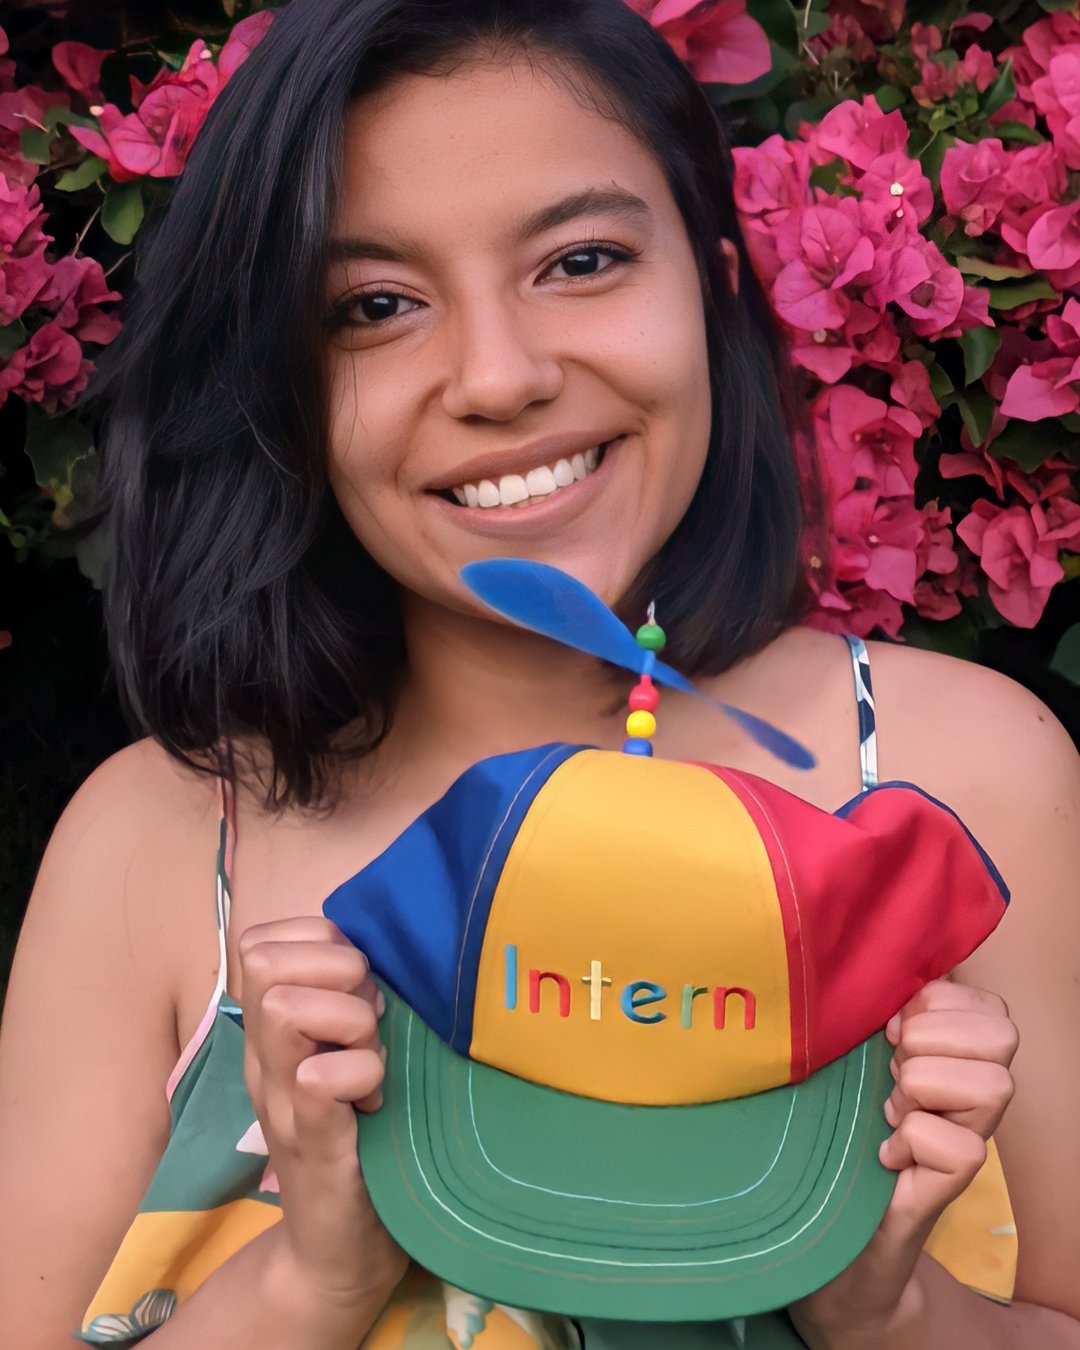 Micka holding a red, yellow, green, and blue Intern hat while smiling in front of pink flowers.